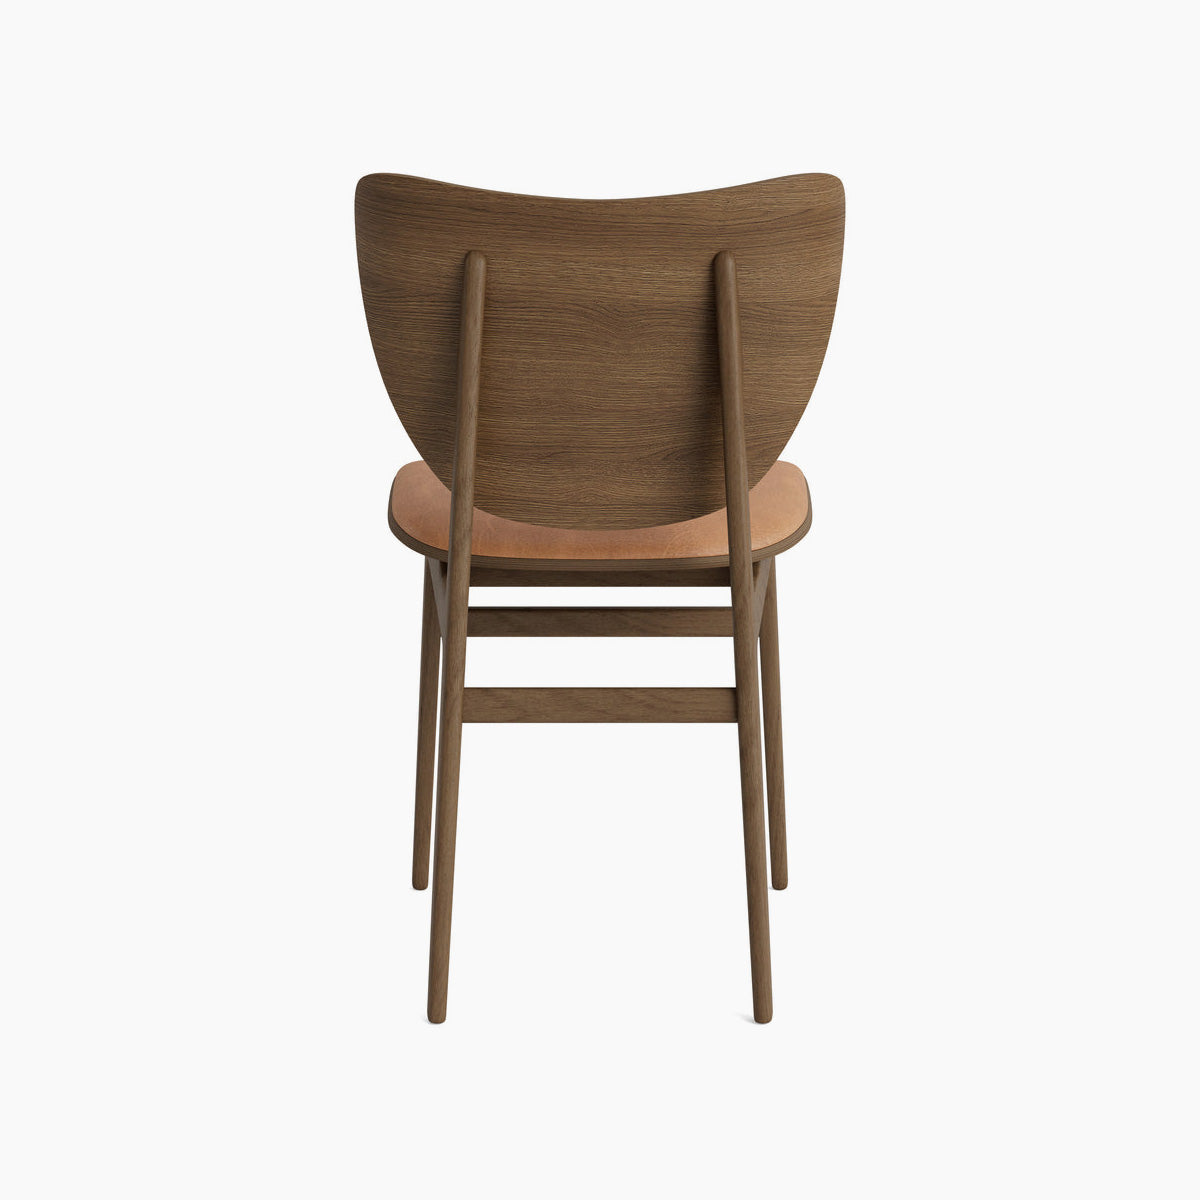 Elephant Chair - Leather Front Upholstery - Light Smoked Oak